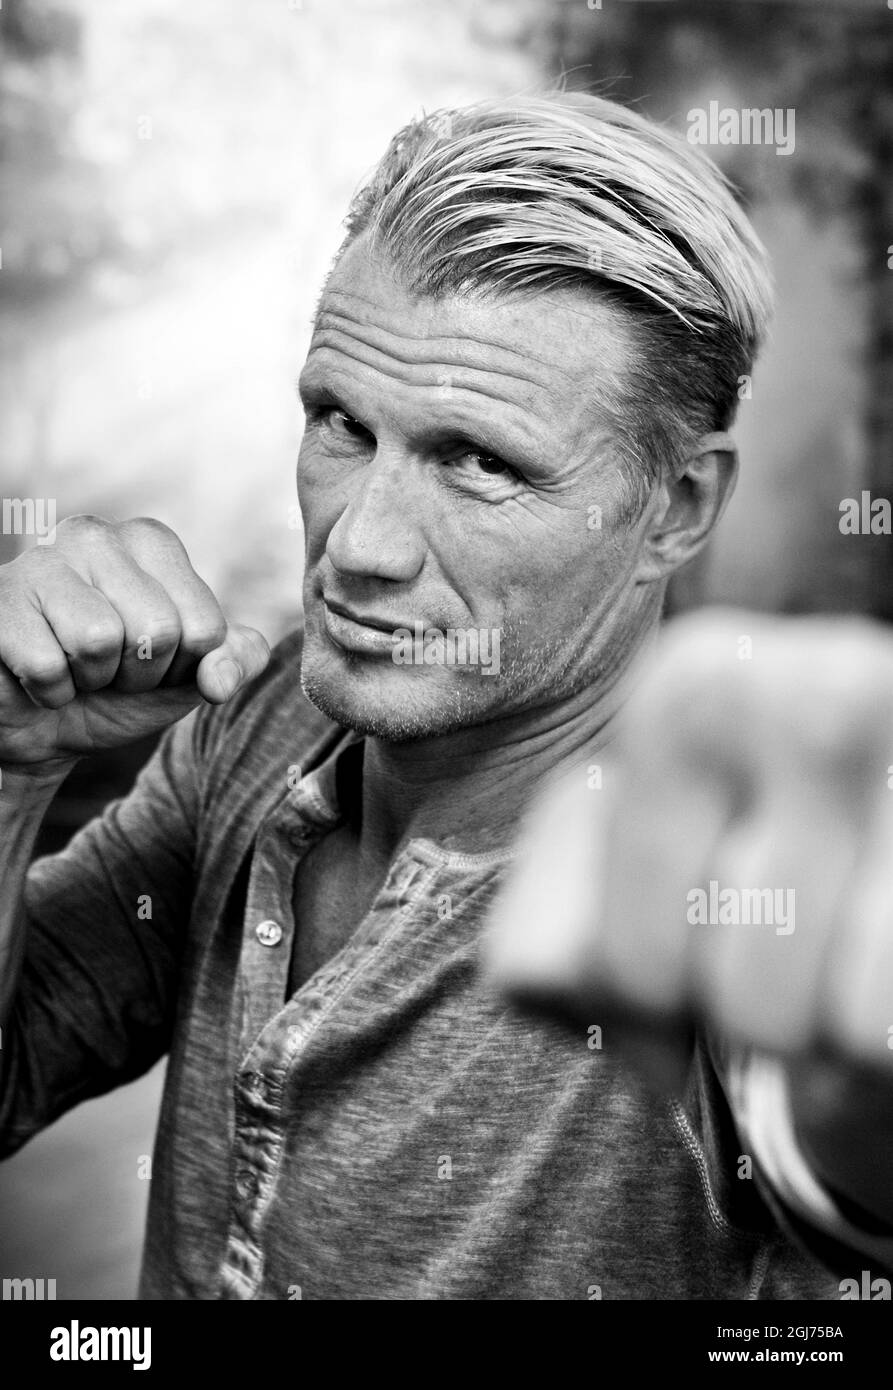 Actor Dolph Lundgren is launching his fitness book 'Fit forever' in Sweden. Stock Photo